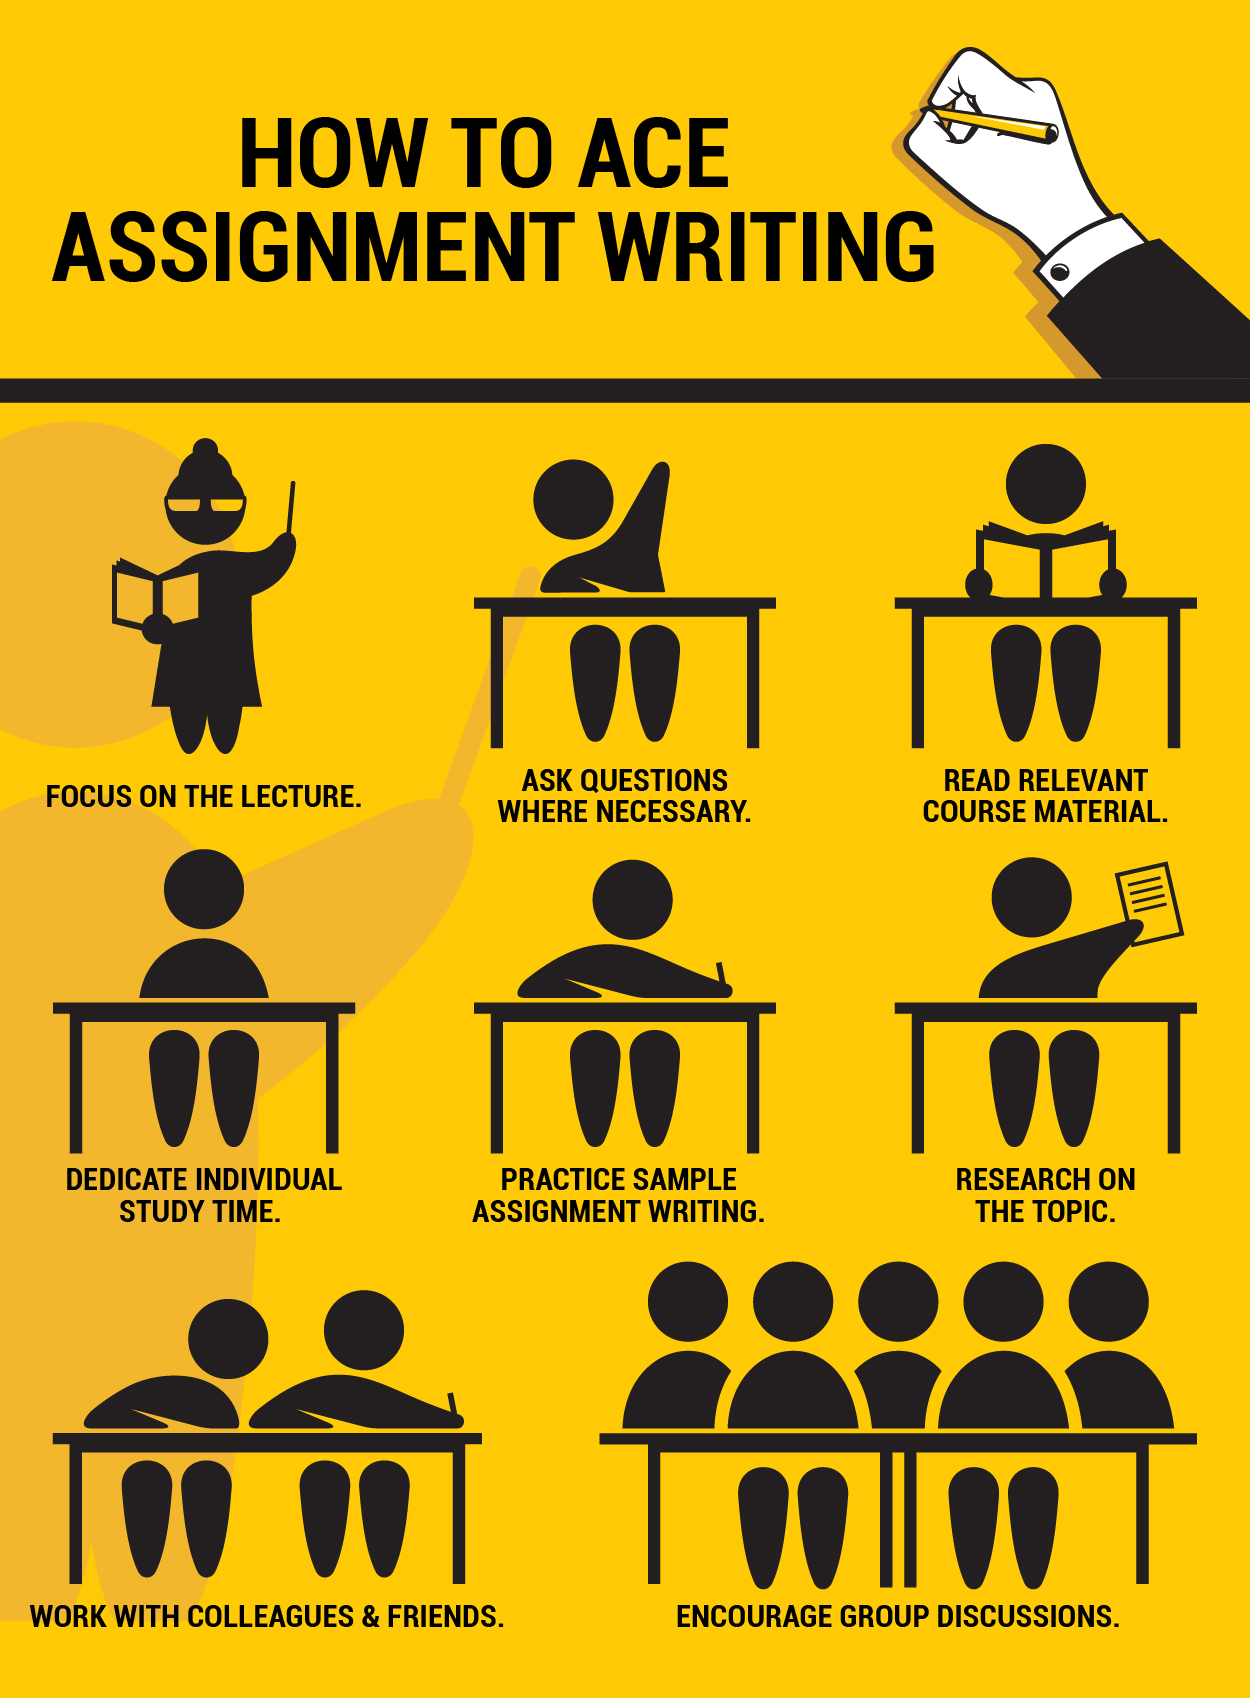 tips for the assignment